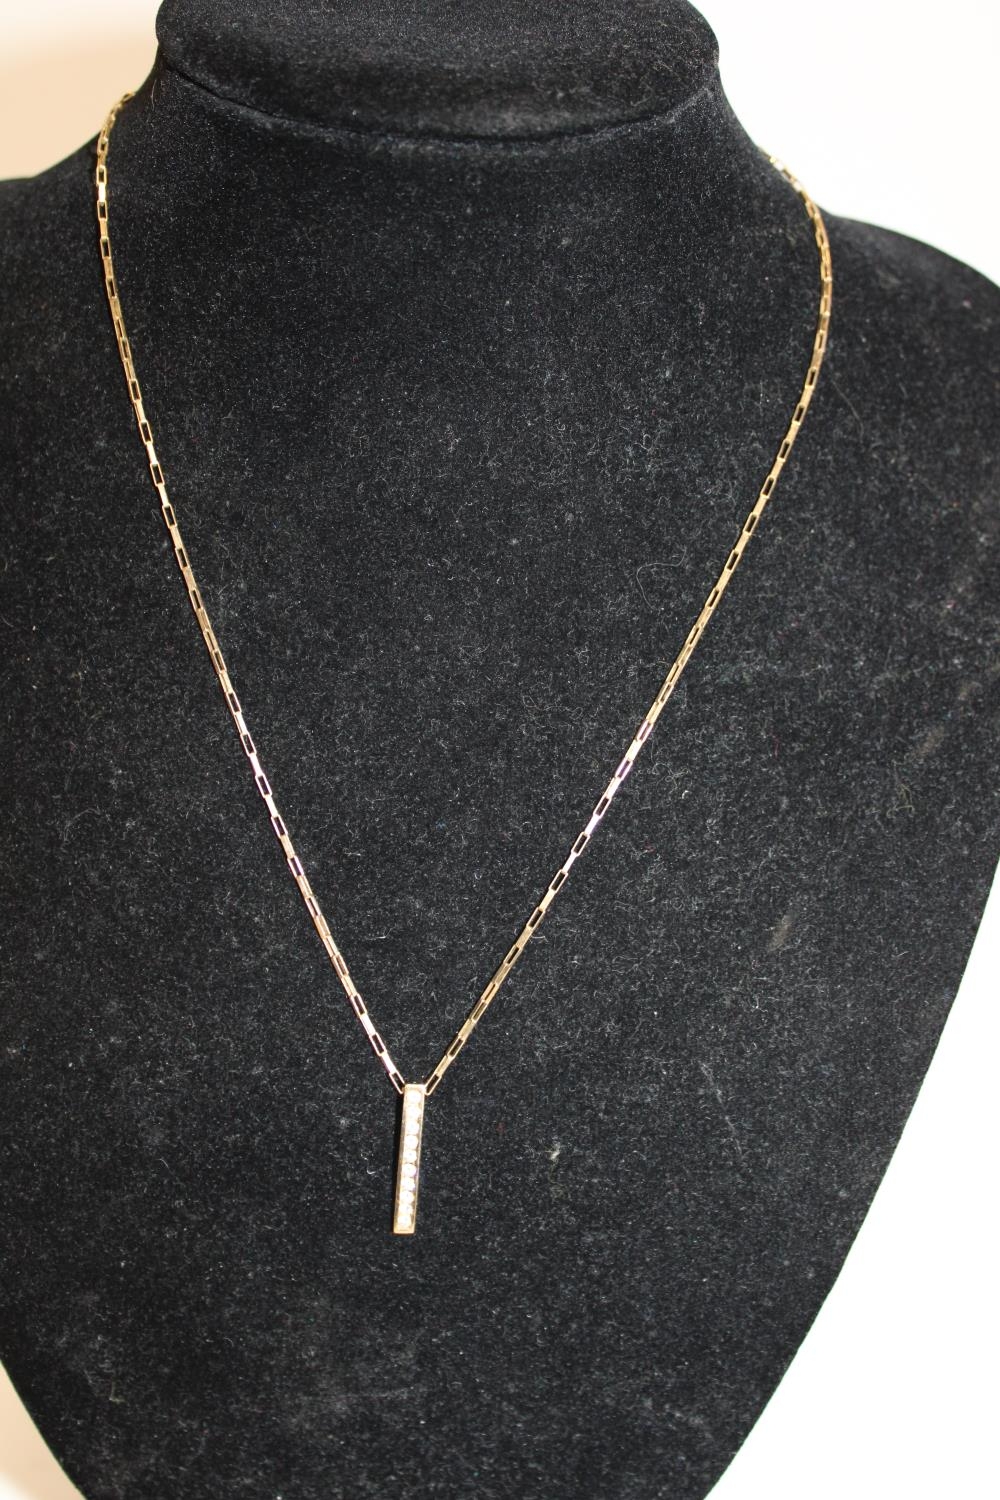 A 9ct gold necklace and pendant 3.1g